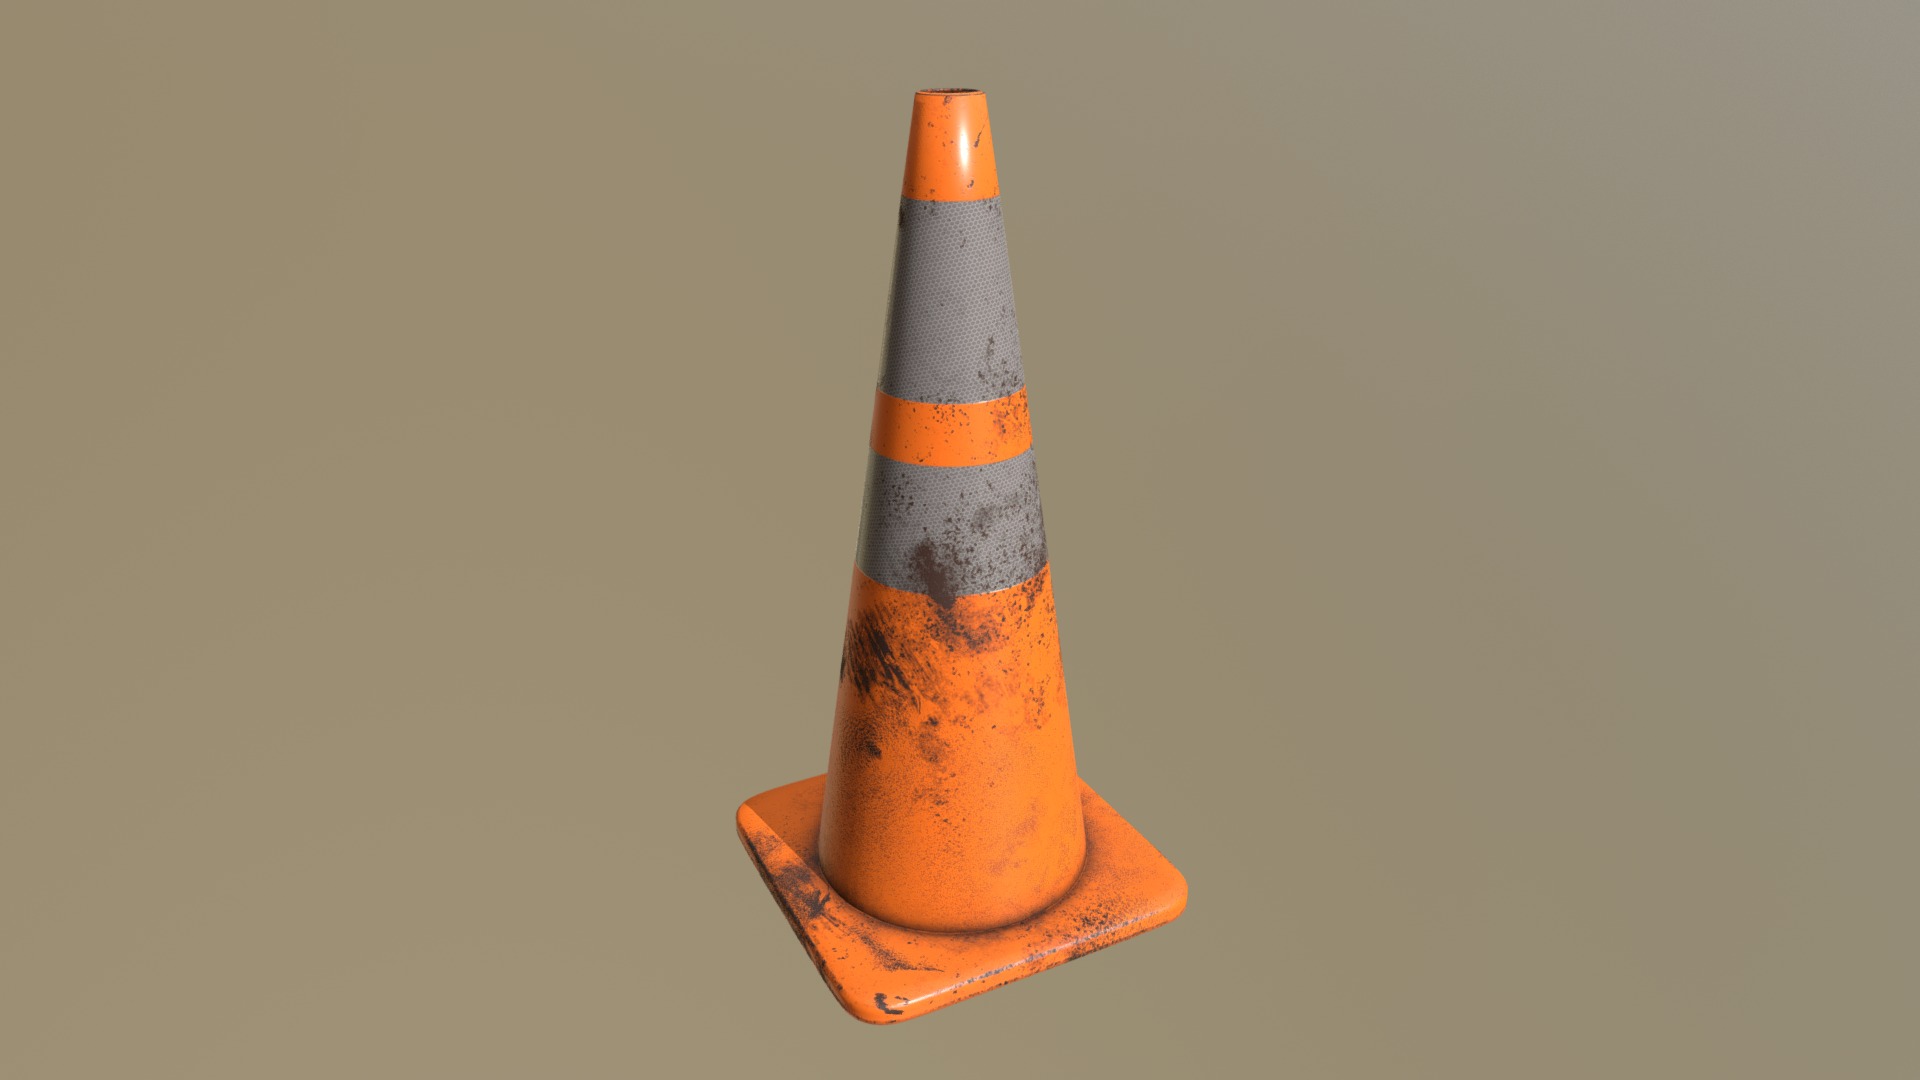 This is a worn 28 inch Traffic Cone that I modeled in 3Ds Max, and textured in Substance Painter. It was originally created a little over 6 months ago. I recently improved the wear and tear for this model to update it for the store.

All measurements are accurate with those found on roads and/or freeways. This model has only 3,264 polys and is ready to be placed in a scene or video game.

The cone itself is twenty-eight inches tall, with the first six inch reflective band starting four inches down from the top (the current US standards). Then there is a two inch gap, and a four inch reflective band.

[Model Statistics]



Polys: 3,264

Verts: 3,328

Tris: 6,528

Formats: .FBX (Low Poly), .spp (Substance Painter), .Max (3ds Max Files)

Materials: Yes | PBR Metal/Rough Workflow

Textures: Yes | Base Color, Height, Metallic, Normals, Roughness, AO

UVW Mapping: Yes

Unwrapped UVs: No Overlapping UV Islands

Theme: Street, City, Town, Crime Scene, Traffic, Freeway, Highway

Real-World Scale?: Yes - Traffic Cone (Worn 28 Inch) - Buy Royalty Free 3D model by Omnipotent 3d model